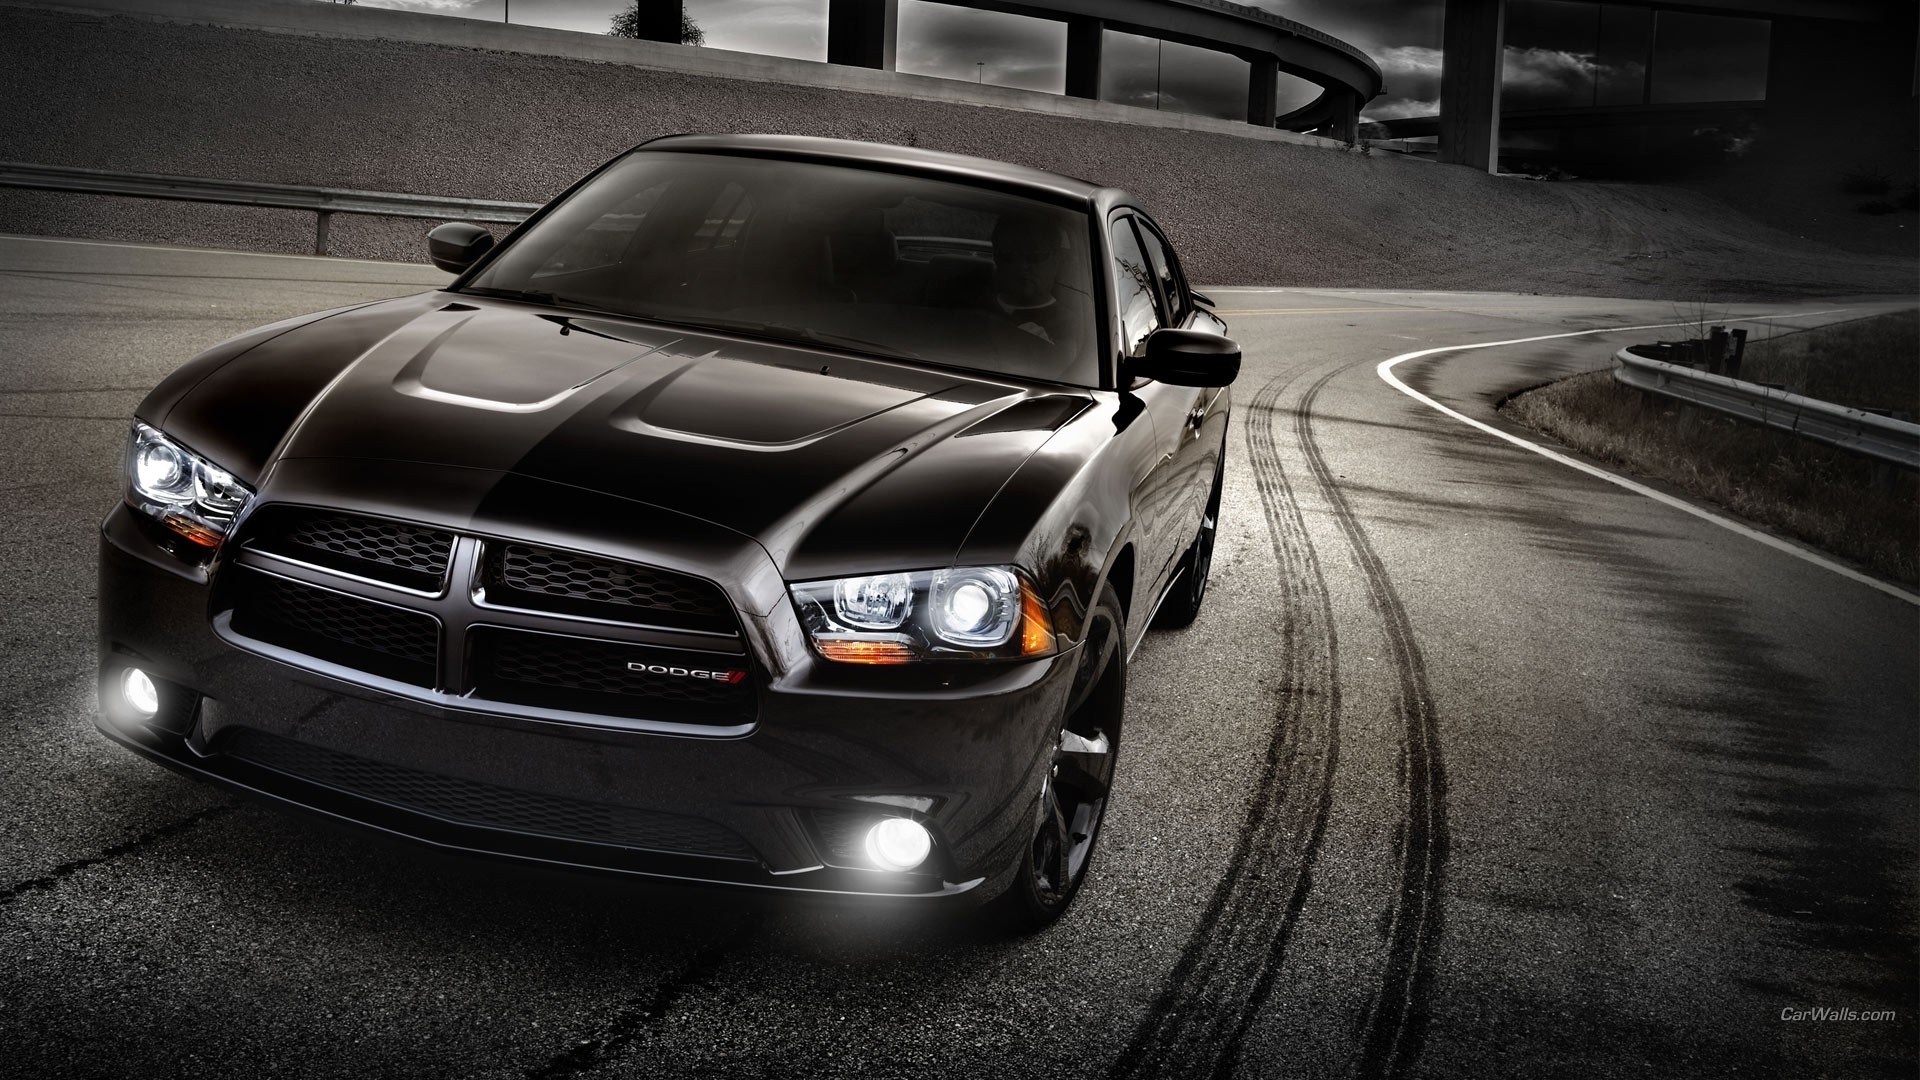 dodge, Charger, Muscle, Cars Wallpaper